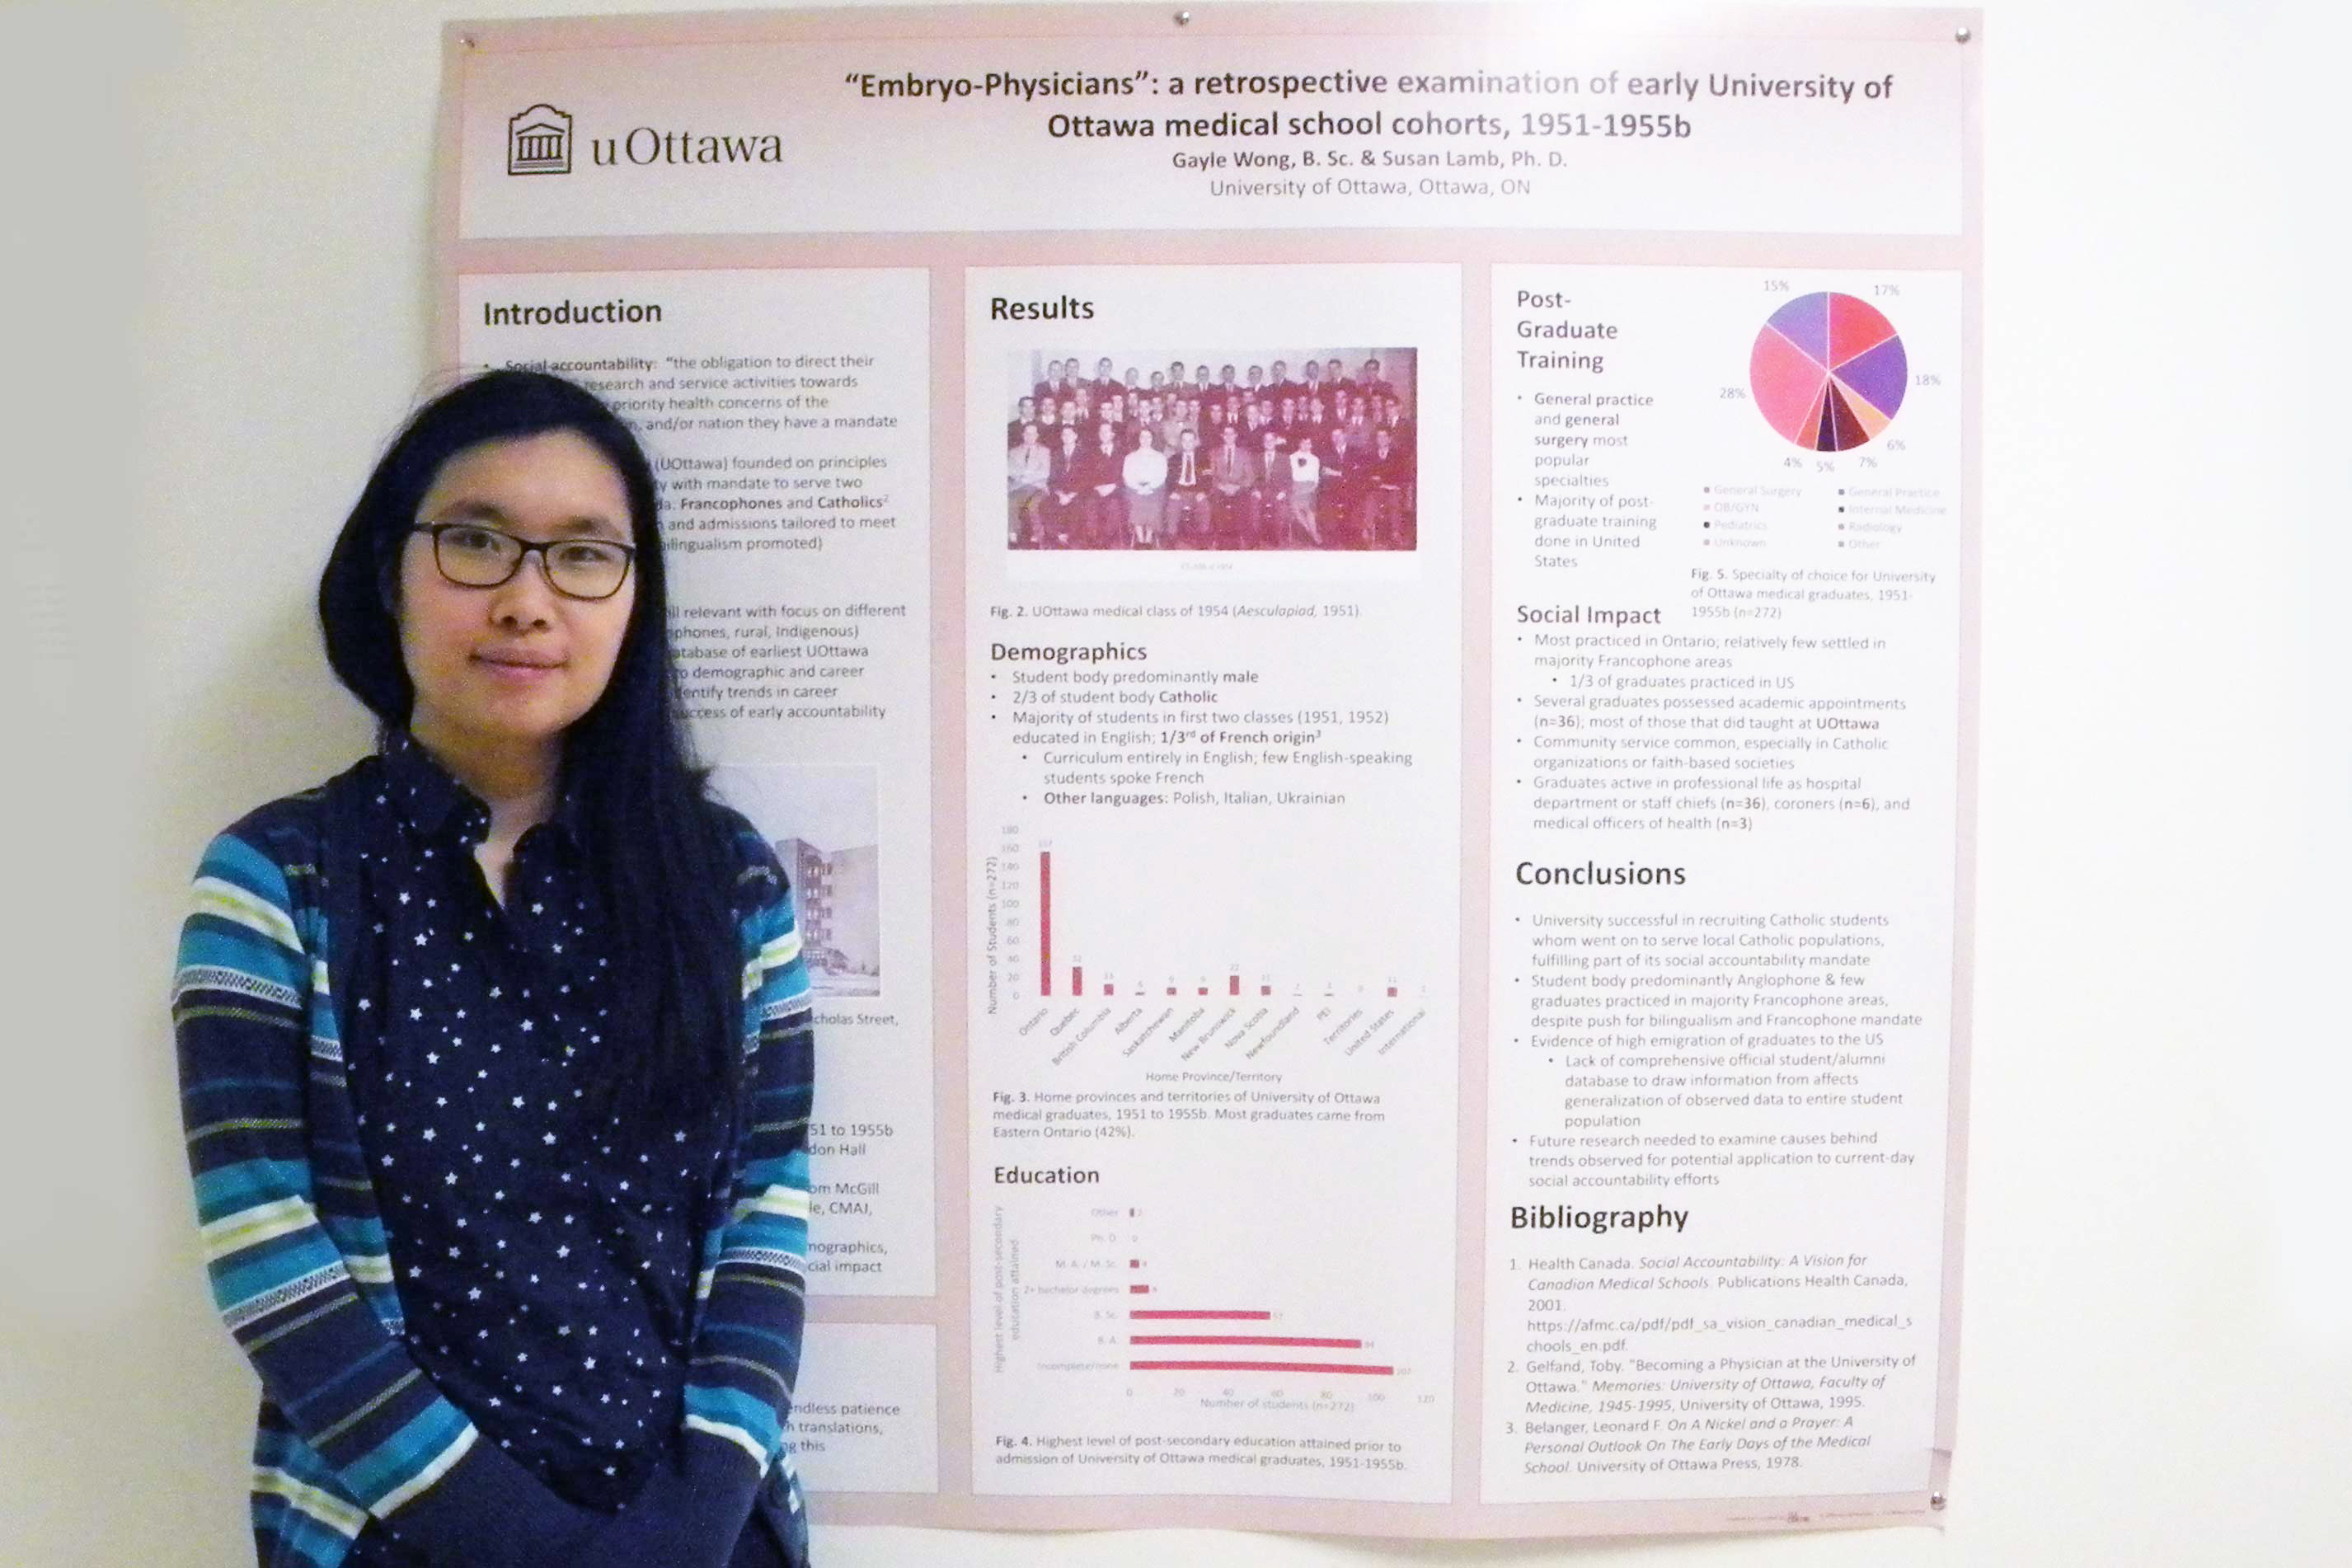 Photo of Gayle Wong standing in front of her poster.